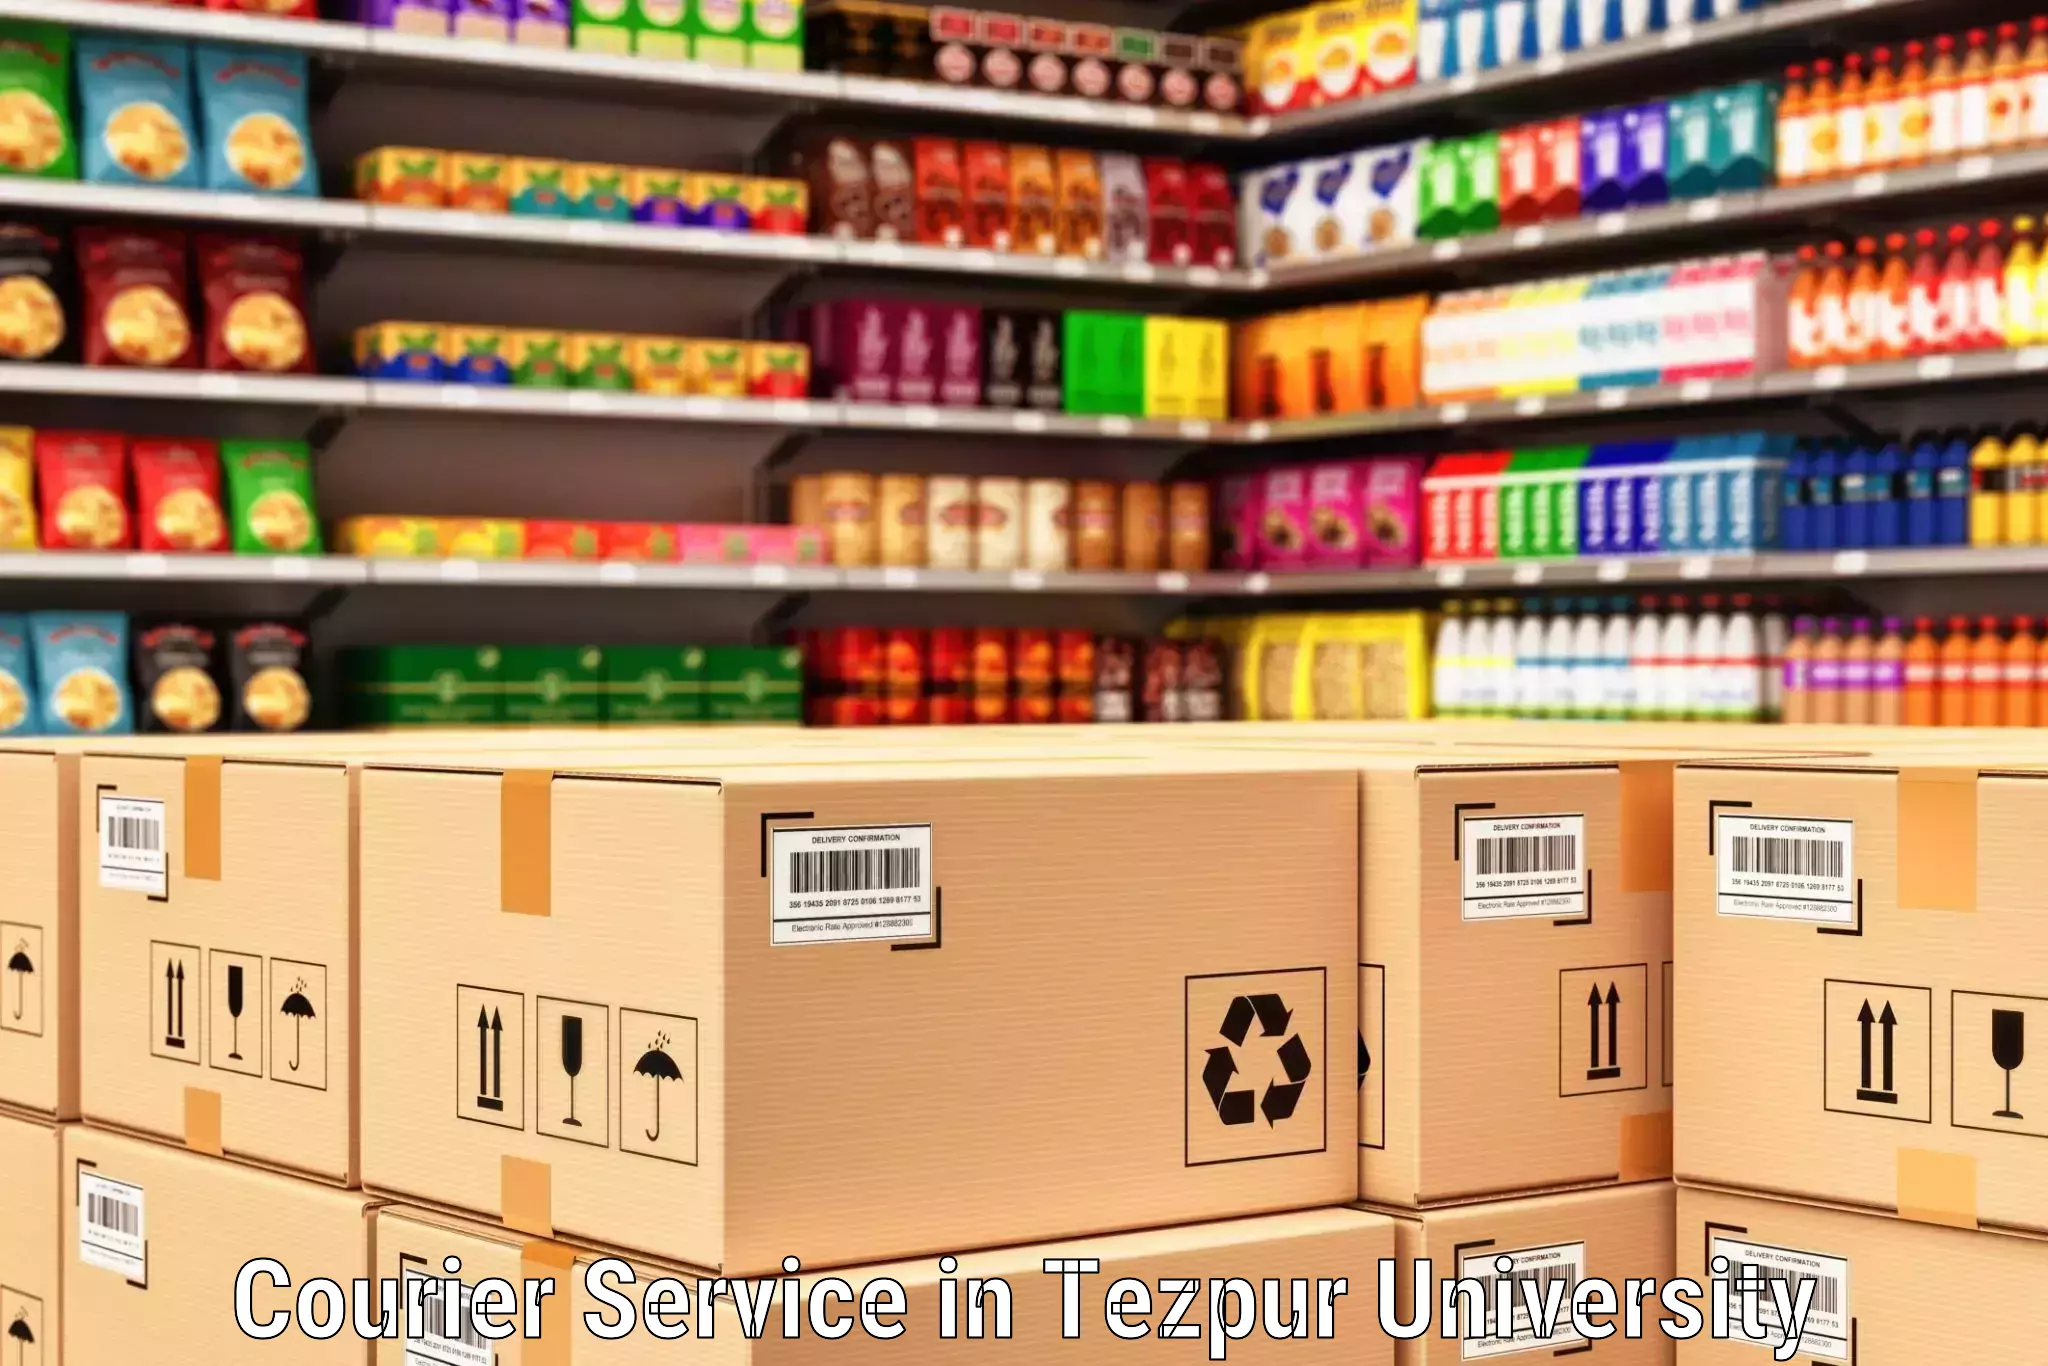 Sustainable shipping practices in Tezpur University